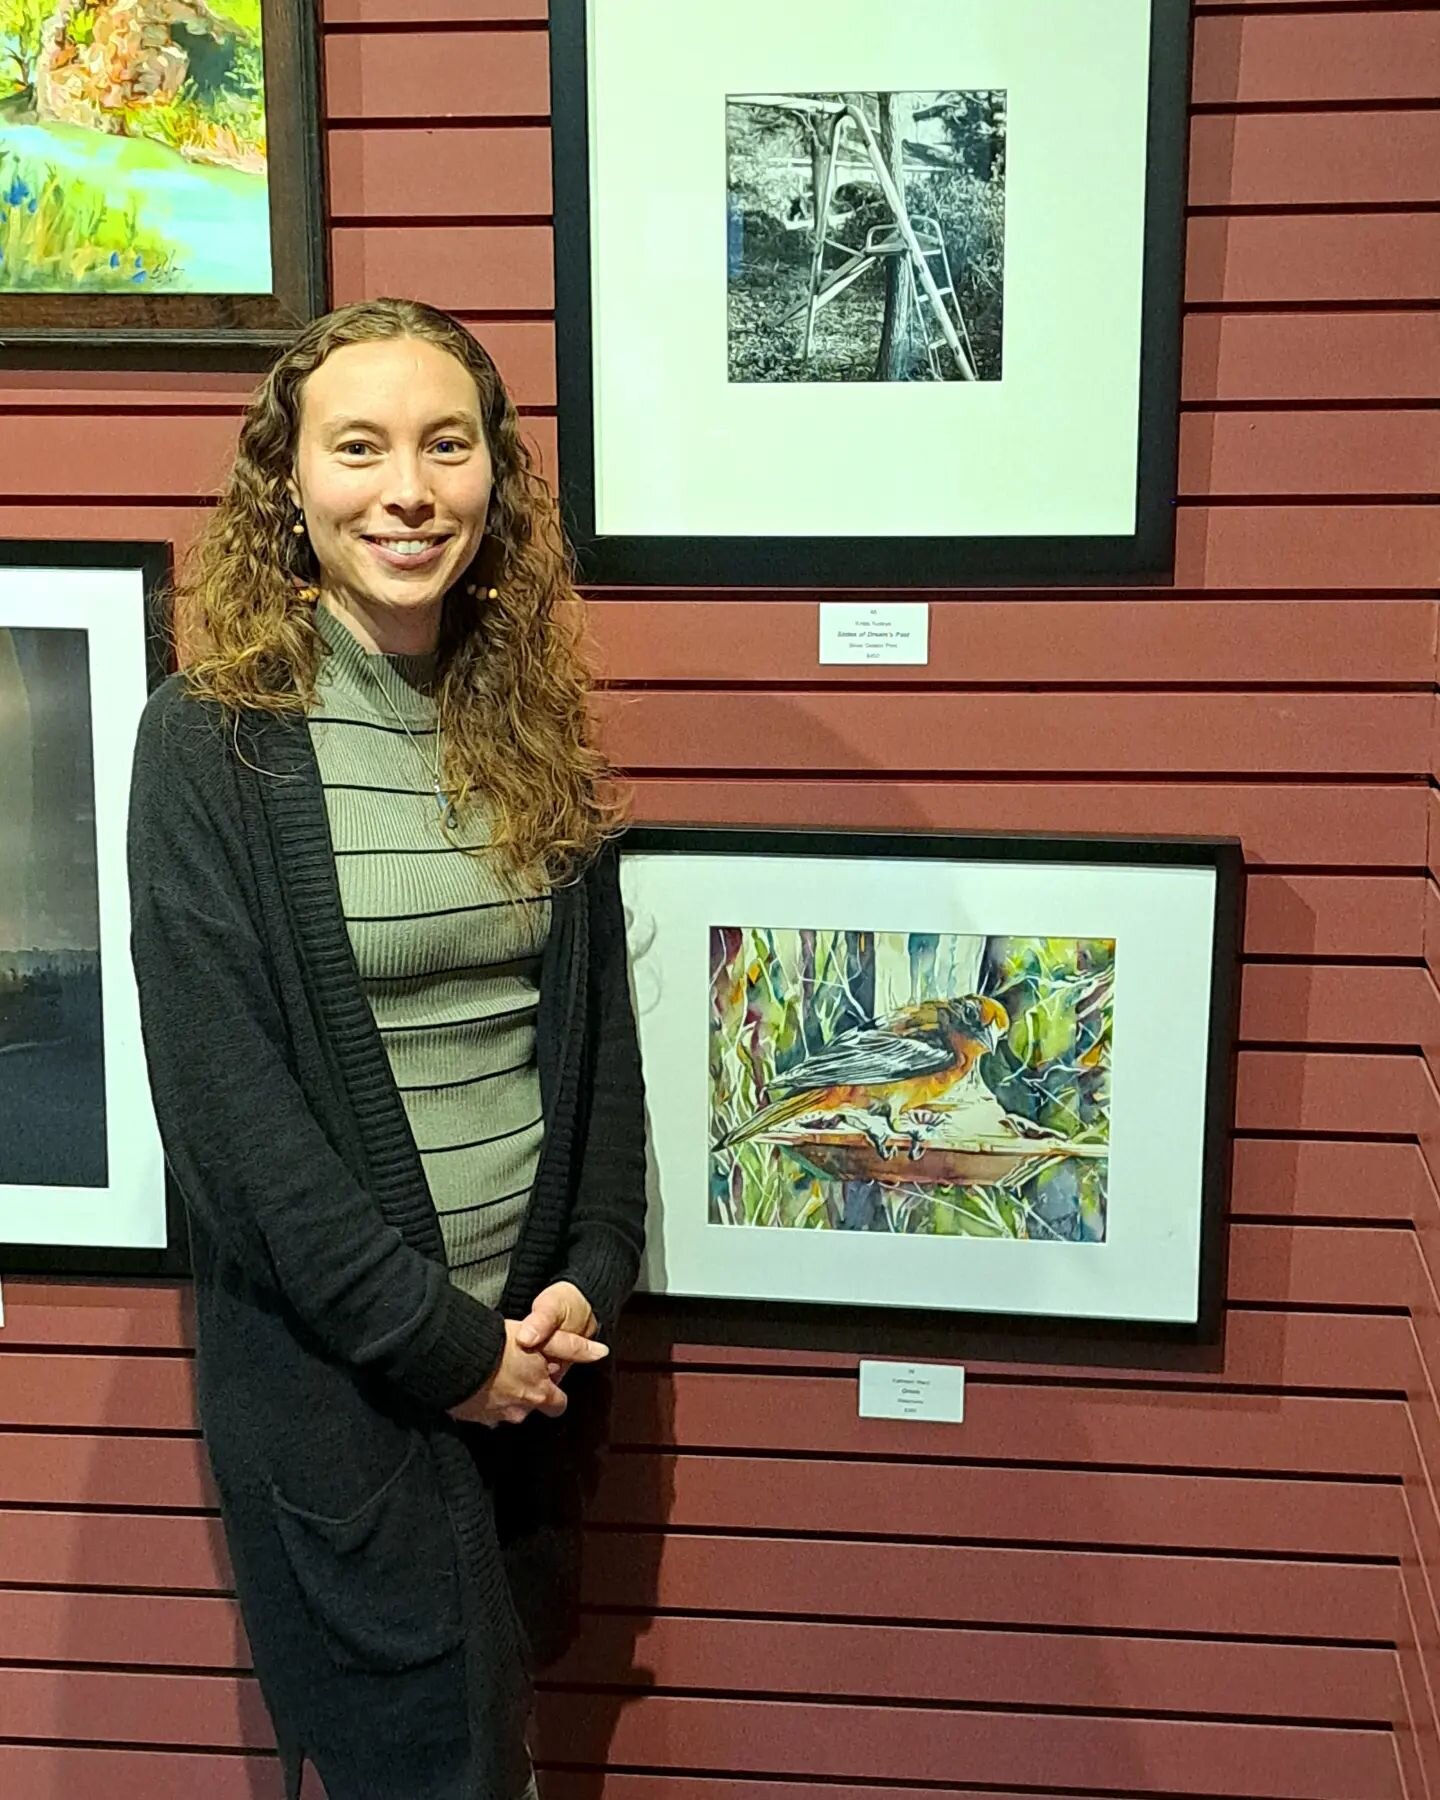 I am humbled to have been selected as an artist in Heartland's 34th juried regional art exhibit. I love being apart of the growing artist community and Heartland Artists Gallery is such a beautiful  cozy space! It was also great seeing friends and th